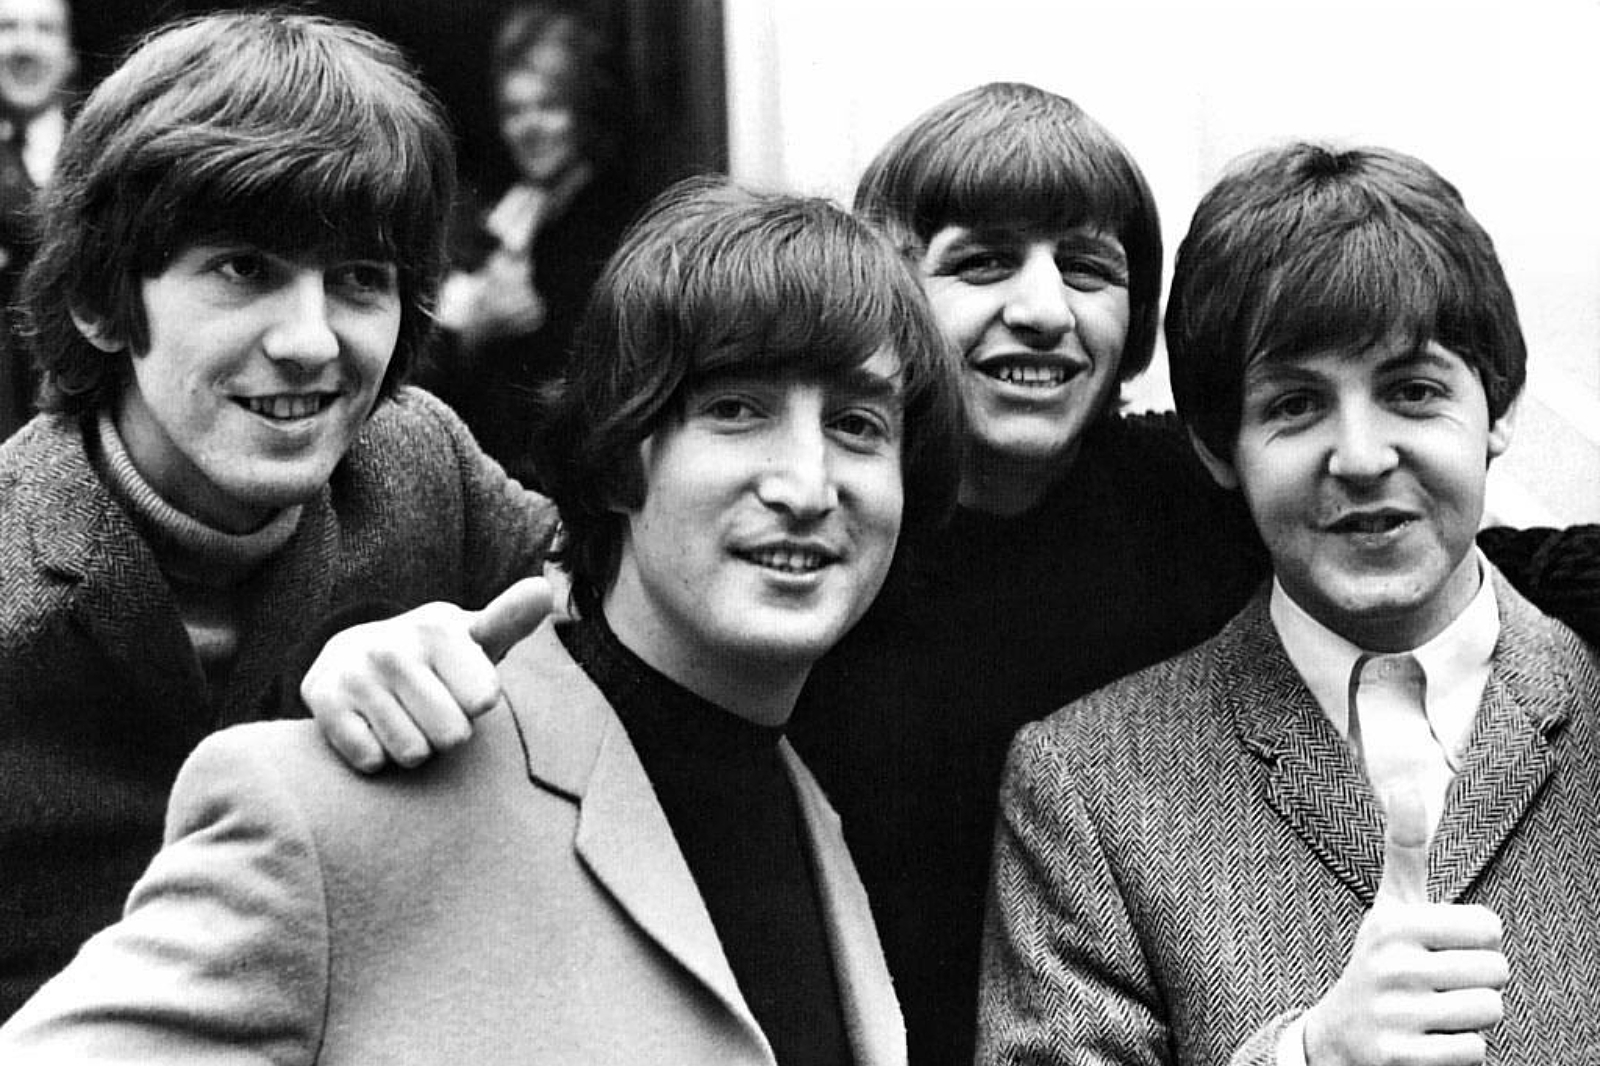 Musical trend study says hip-hop revolutionised music more than The Beatles did